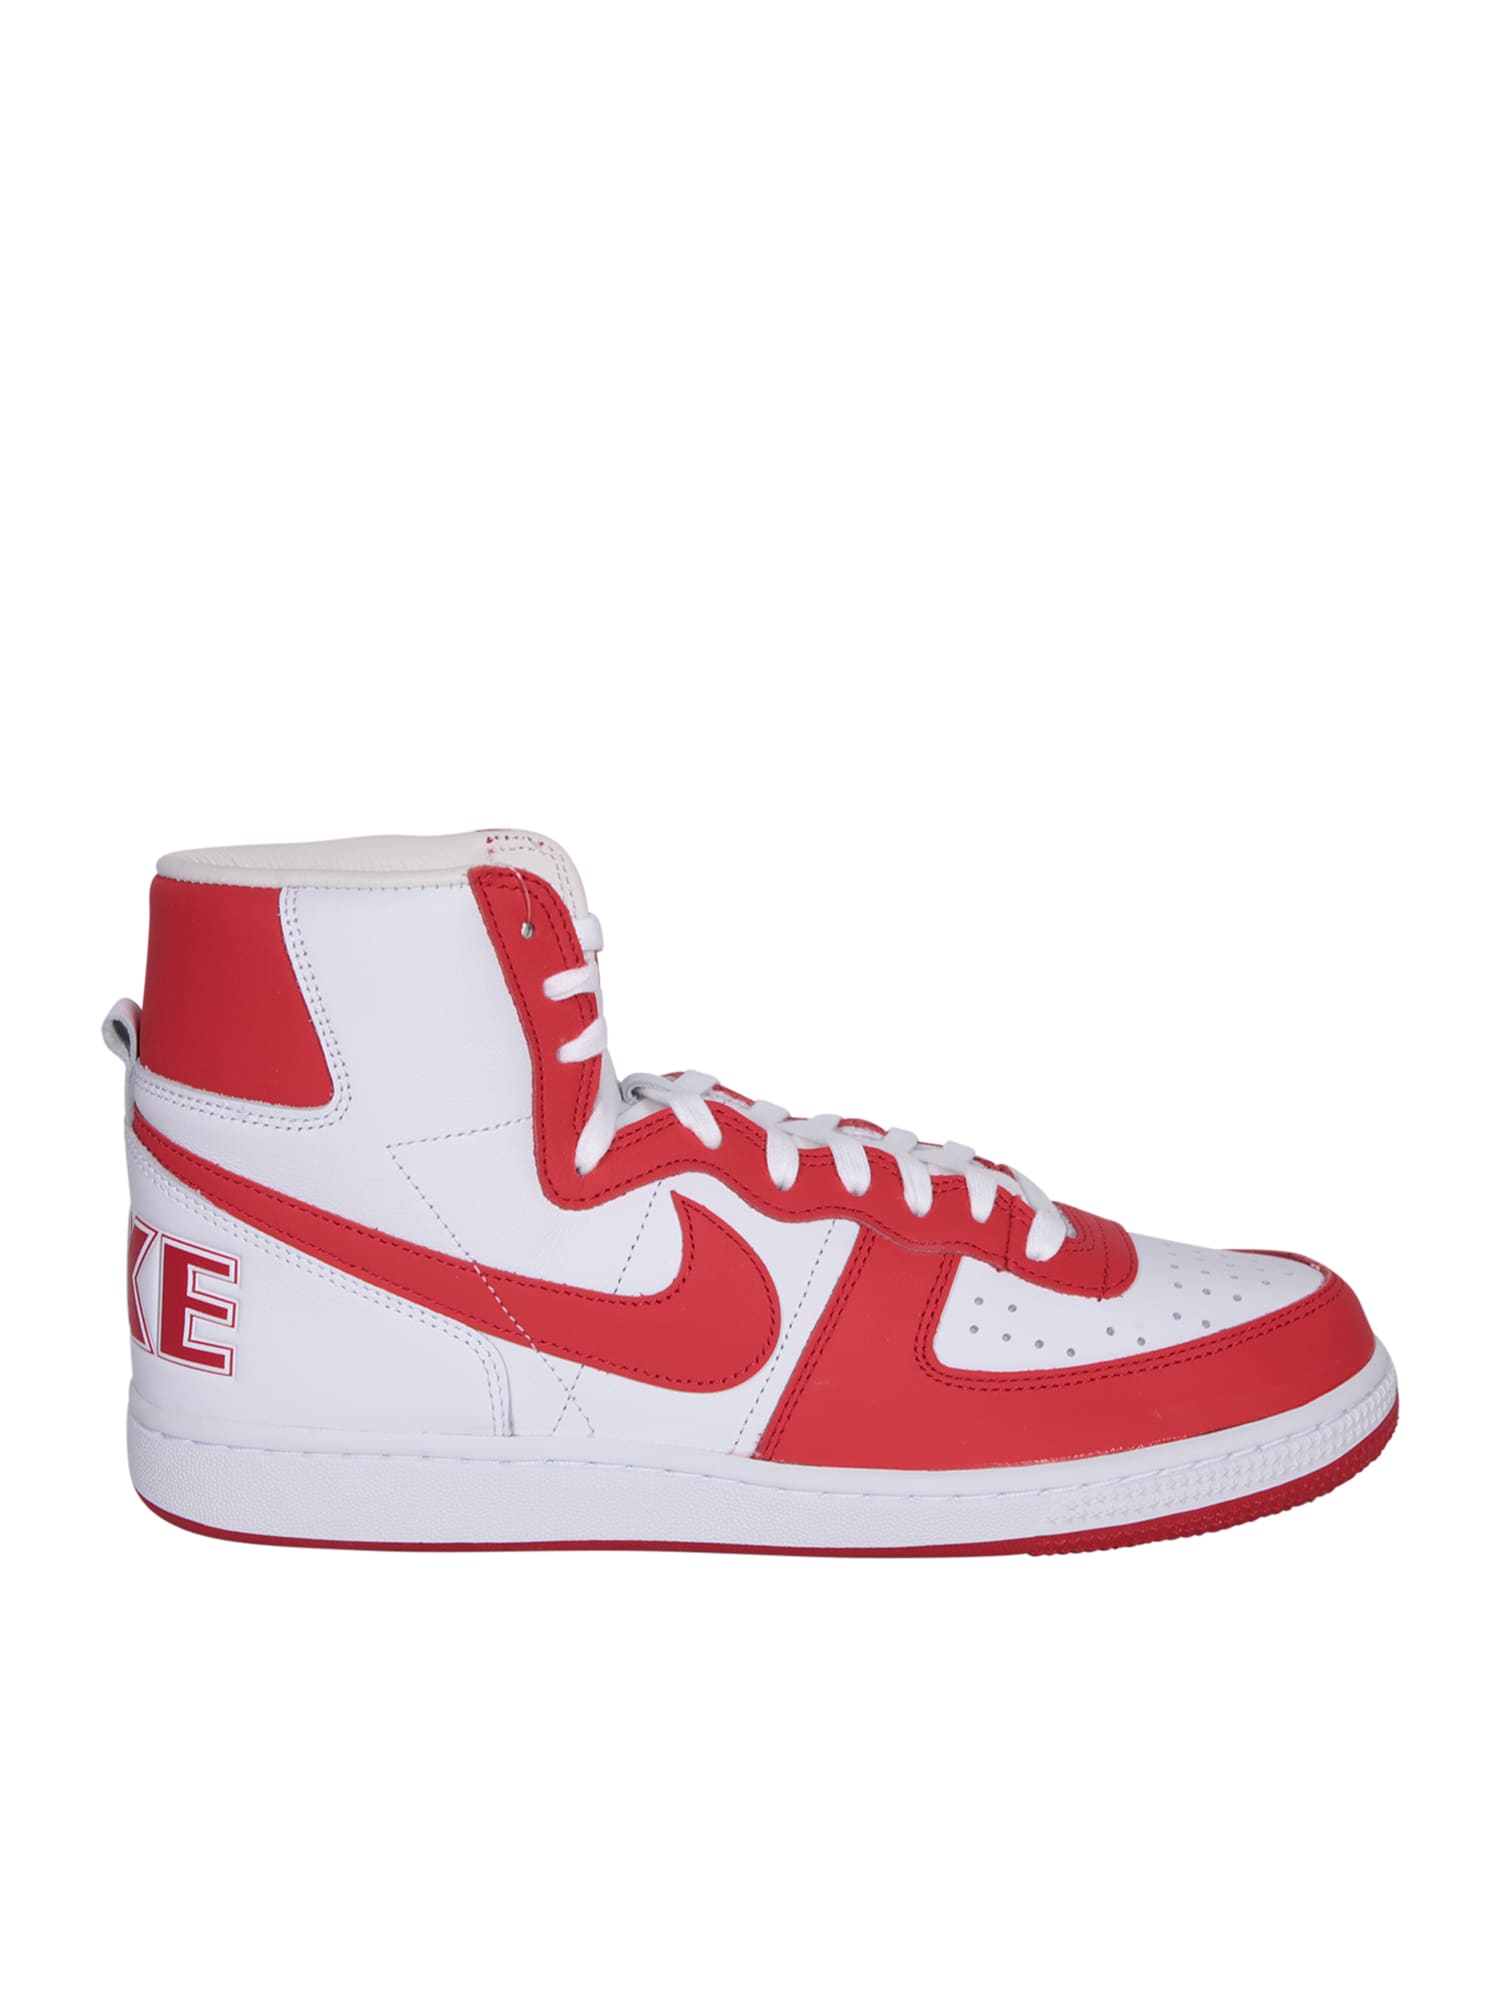 Comme Des Garçons Homme Deux Sneakers High-top Nike Terminator White/red